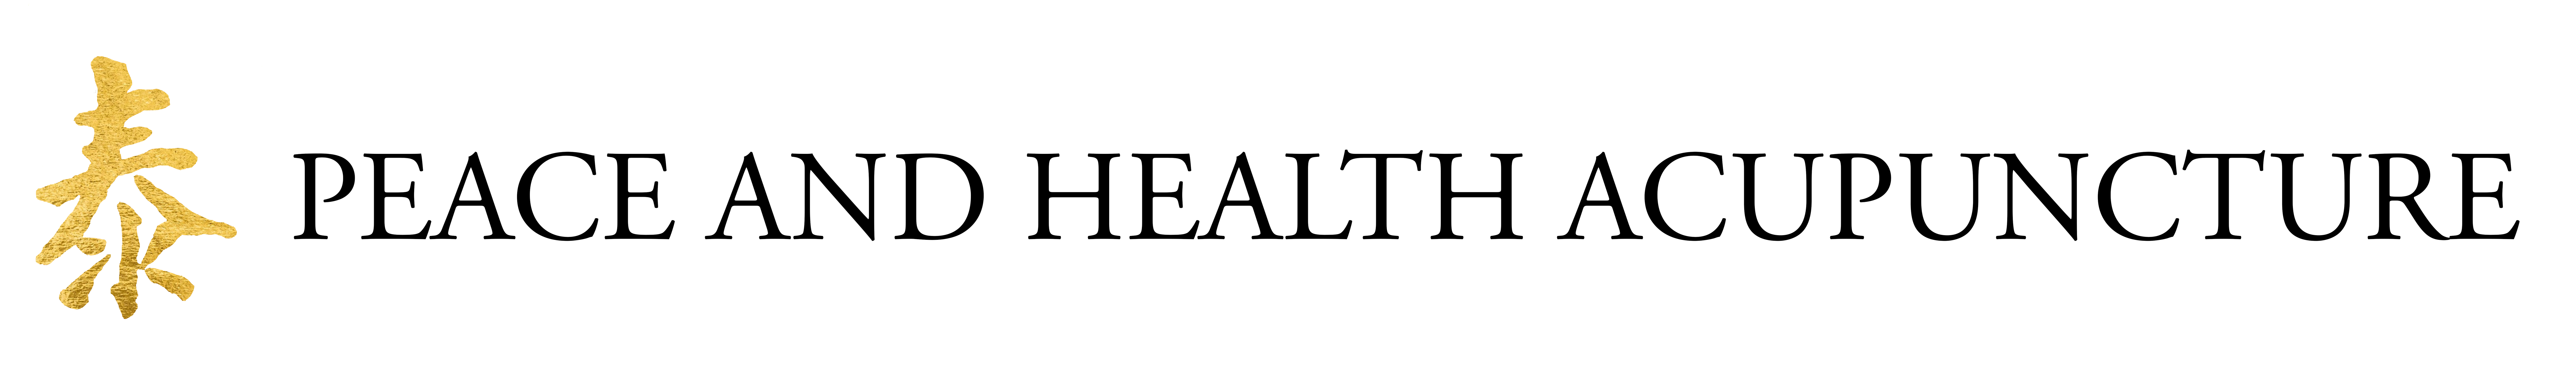 Logo for Peace and Health Acupuncture: a gold leaf image of the ancient writing the character Tai- peace.